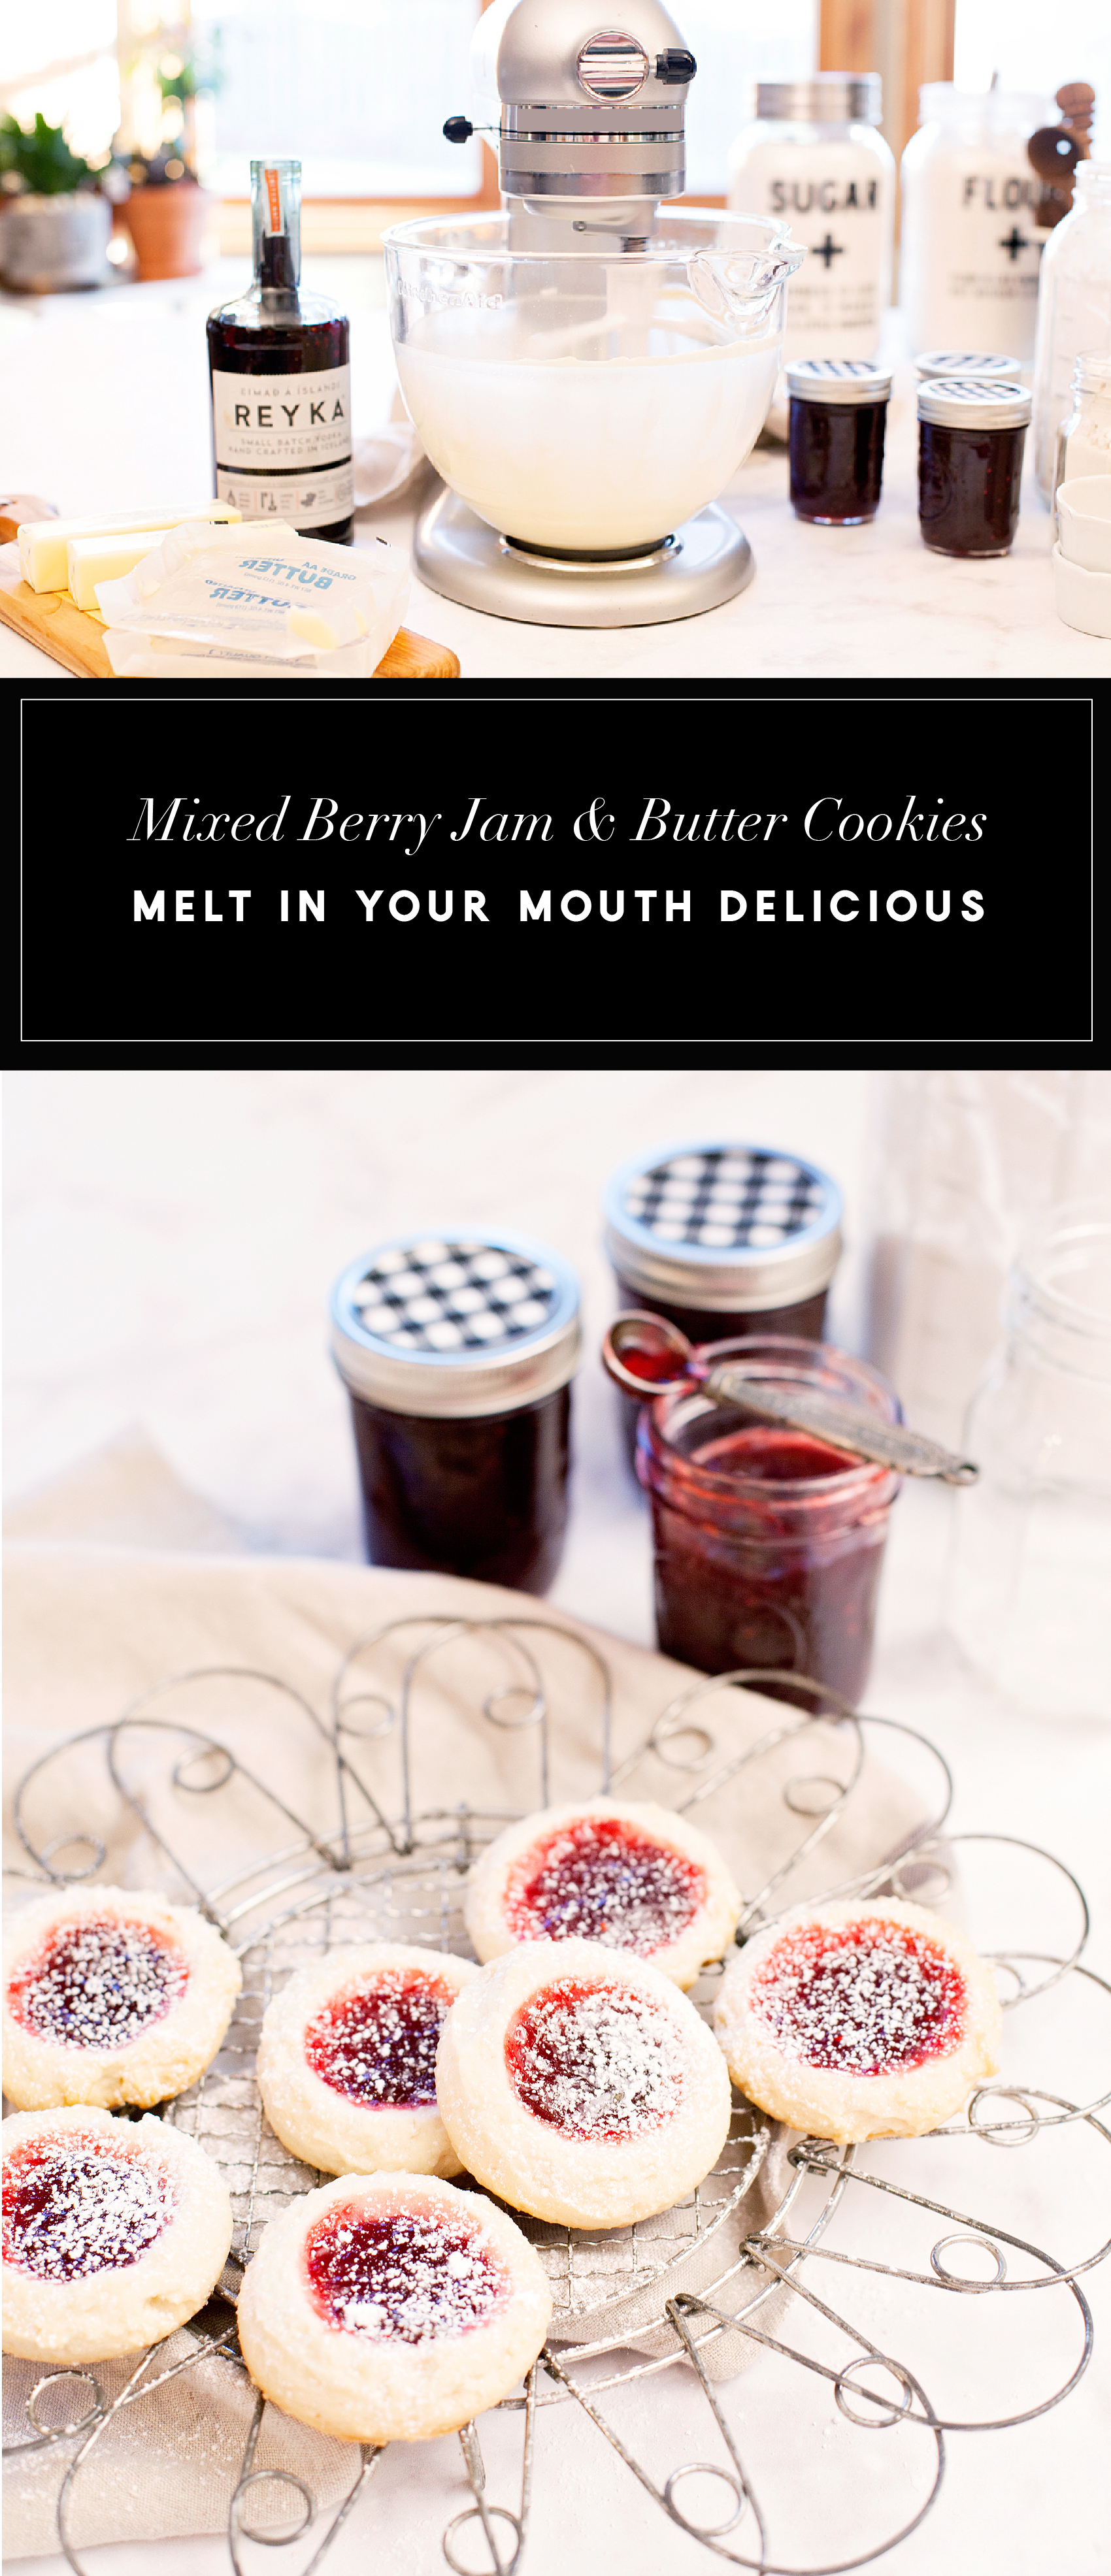 Is there anything better than the smell of cookies baking in the oven? On of my favorites is my Mixed Berry Jam and Butter cookies. The butter cookie literally melts in your mouth and then the jam follows with a burst of berry flavor in your mouth... Oh my, it's soooo good!! Come on over to WhipperBerry to learn how to make these tasty treats!